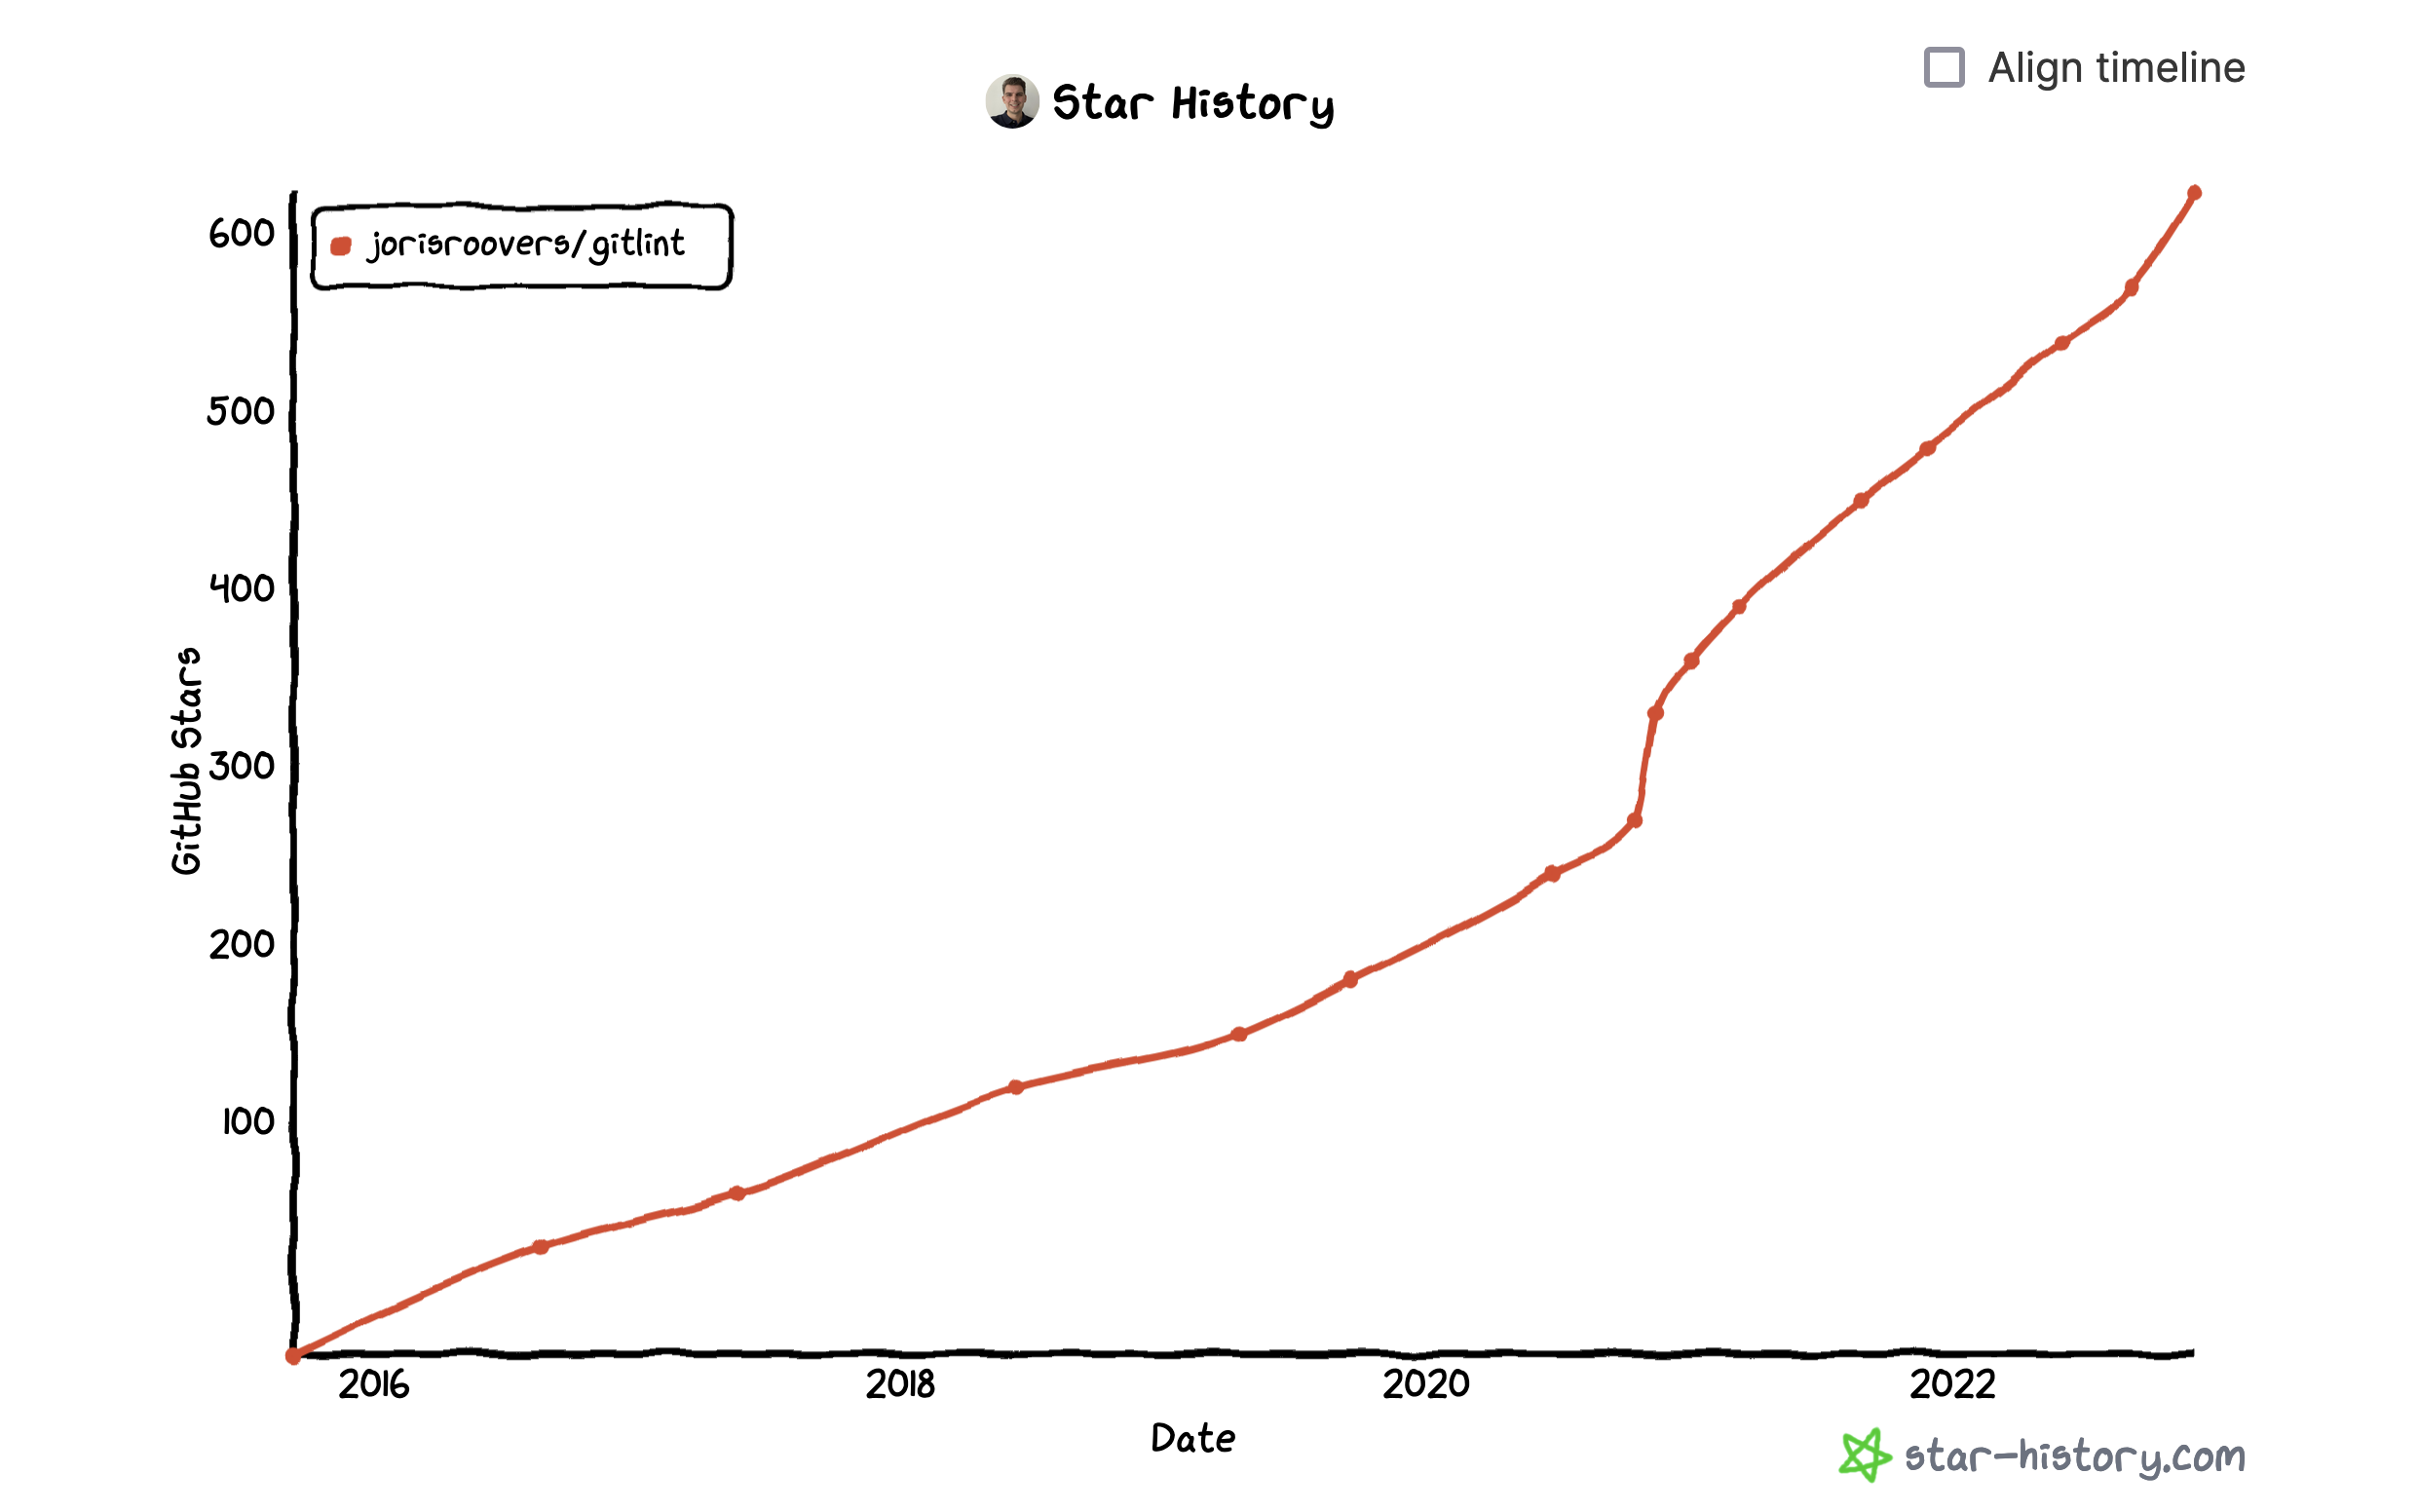 gitlints popularity kept growing this year, with 630+ stars and a perceived increase in community involvement. Source: [star-history.com](https://star-history.com/#jorisroovers/gitlint)